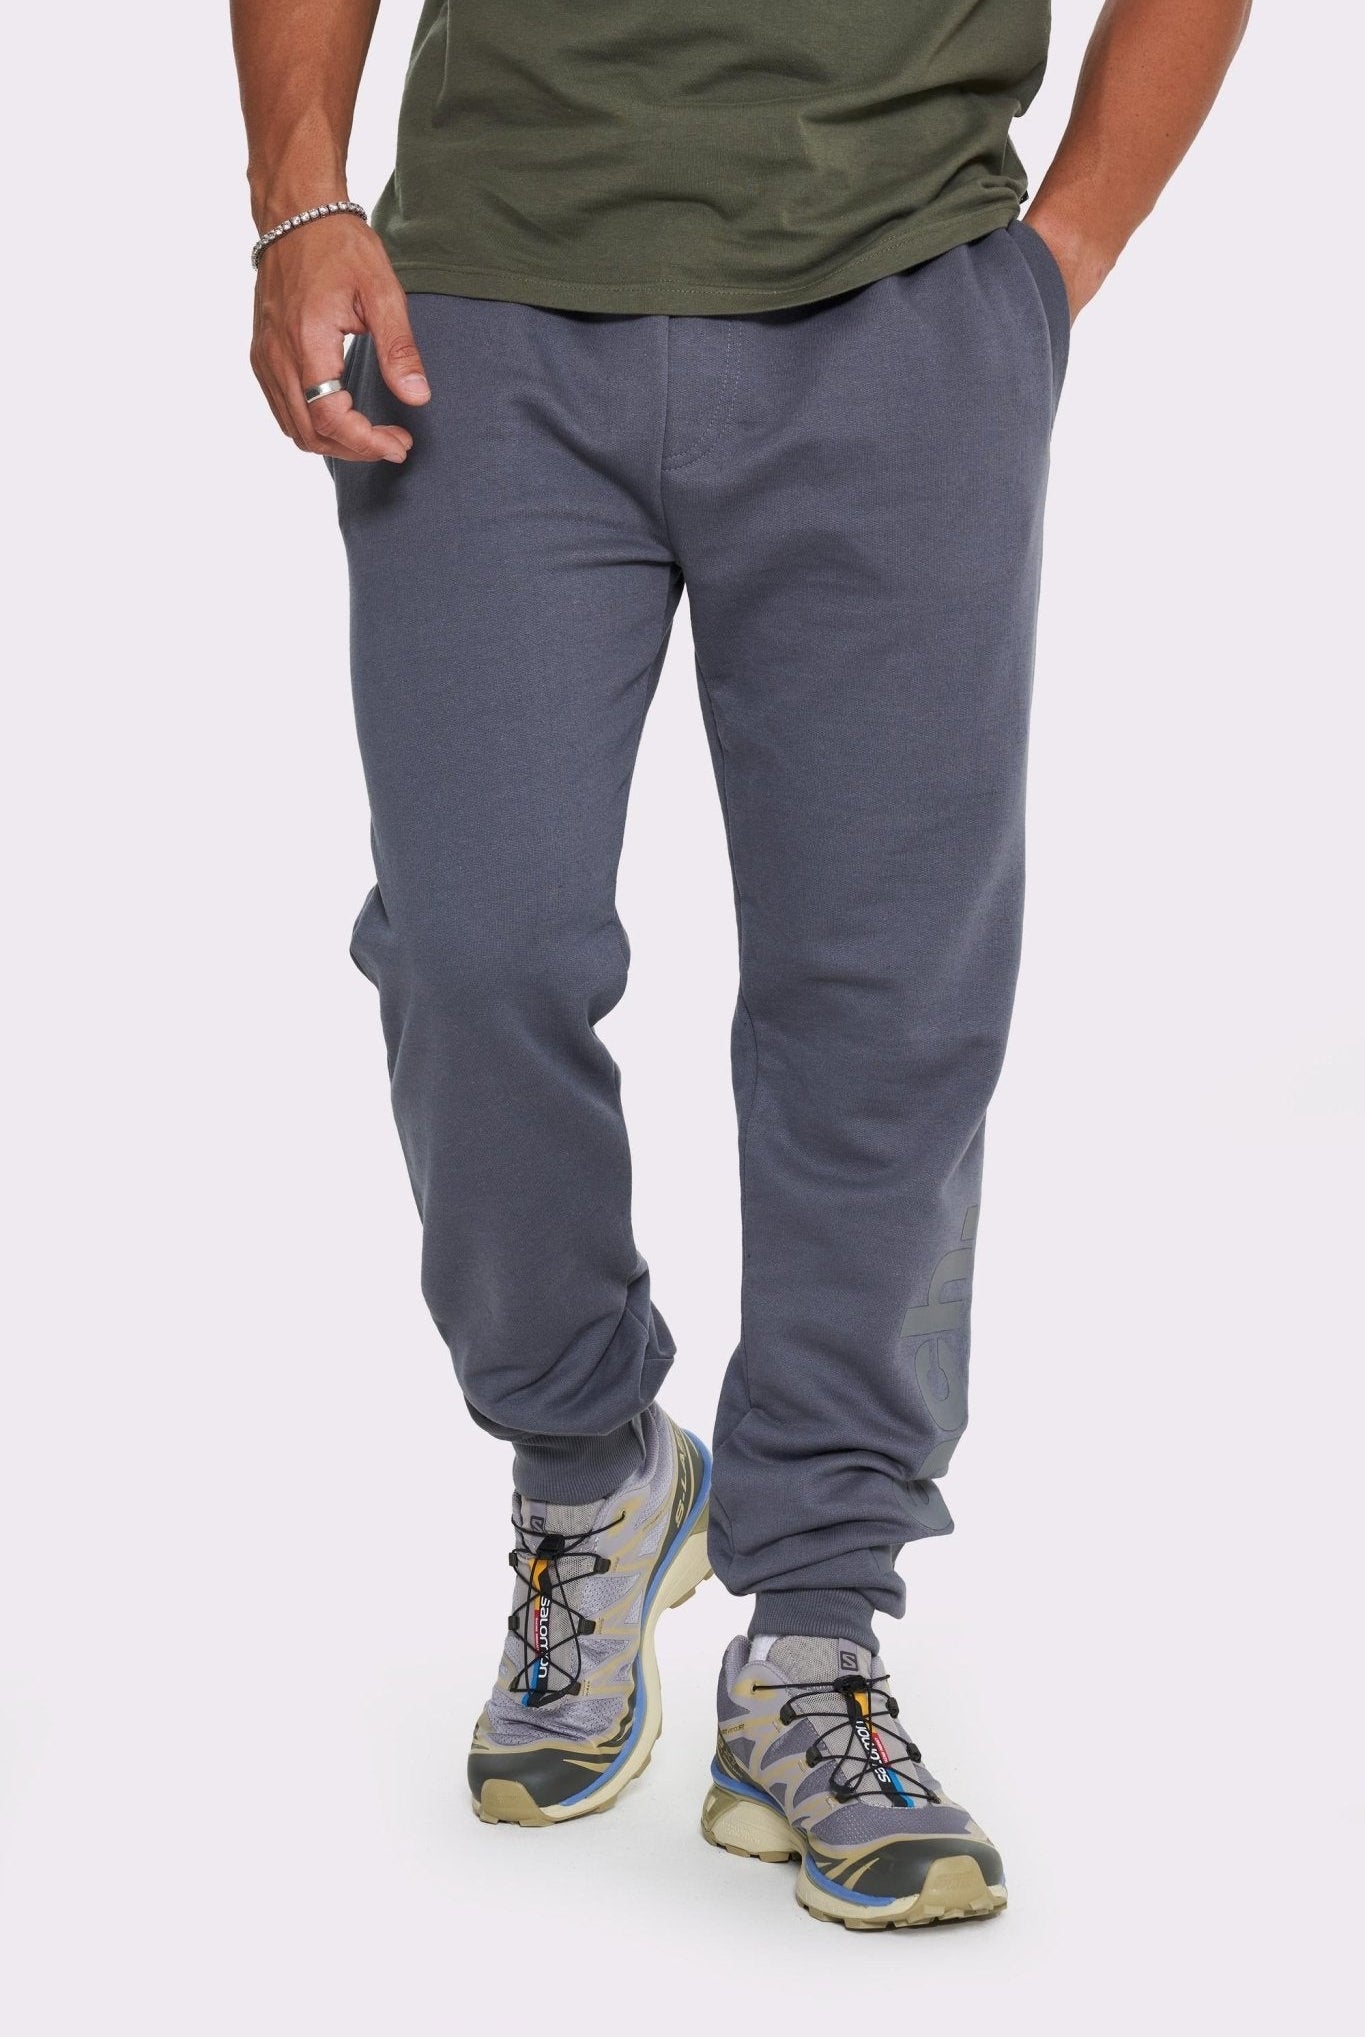 Mens 'PAXTON' Joggers - STEEL GREY - Shop at www.Bench.co.uk #LoveMyHood